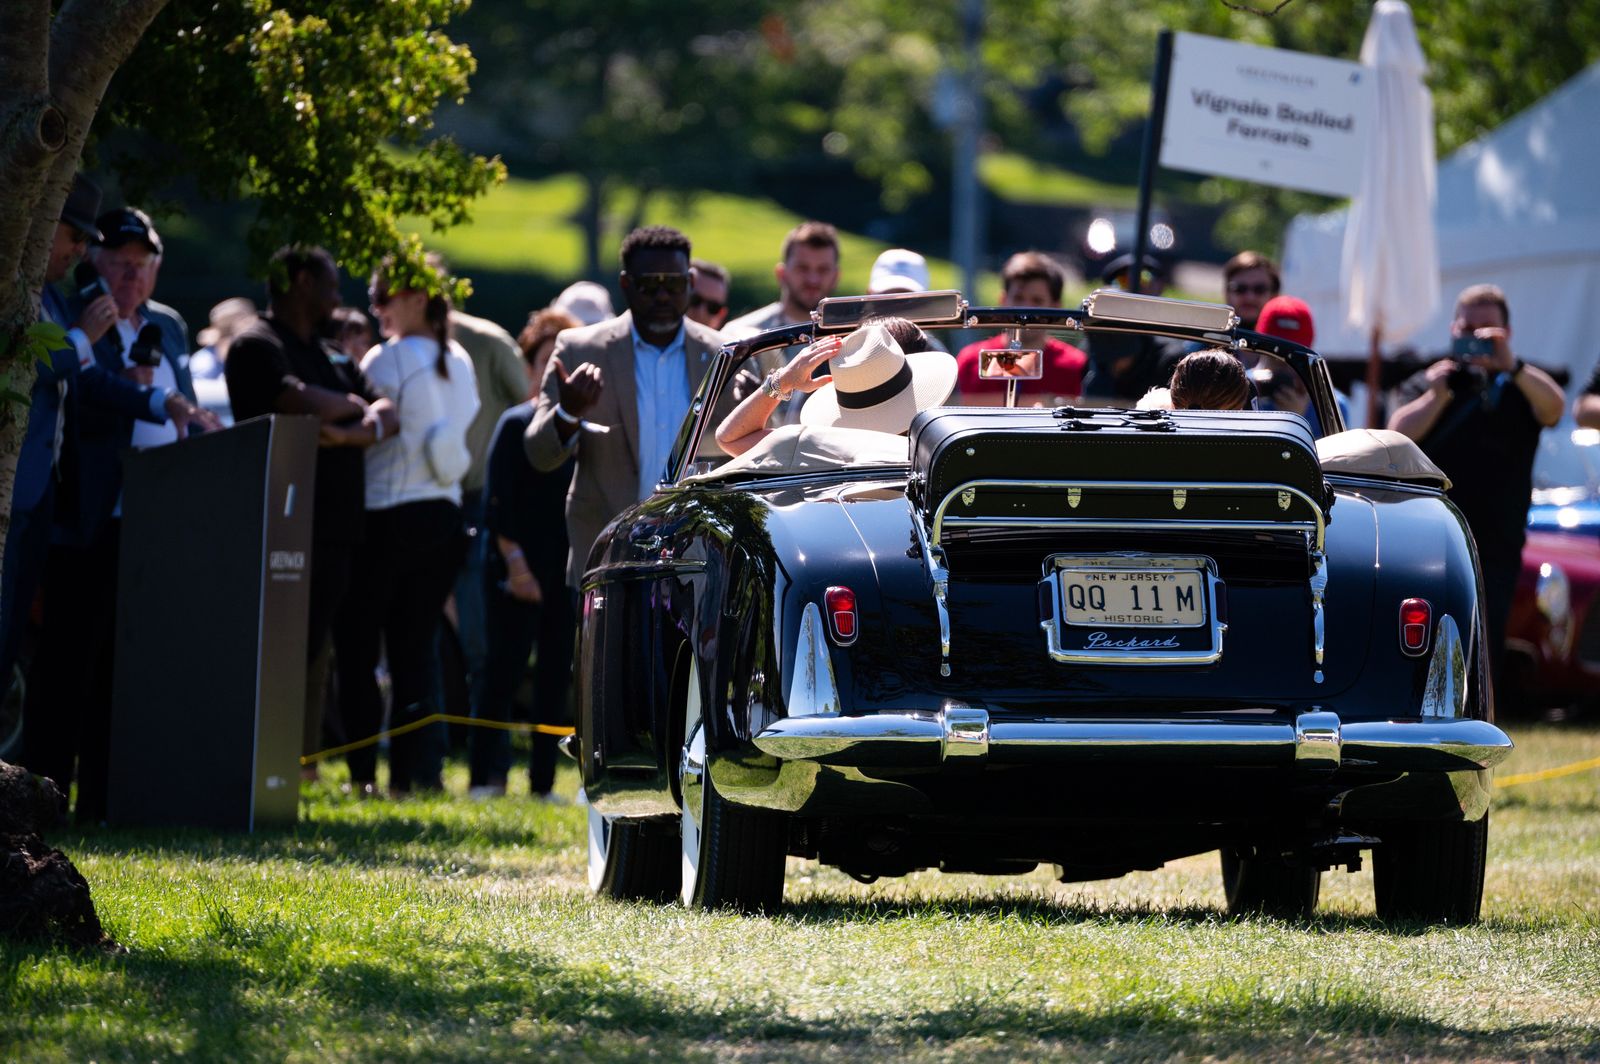 Greenwich Concours d’Elegance